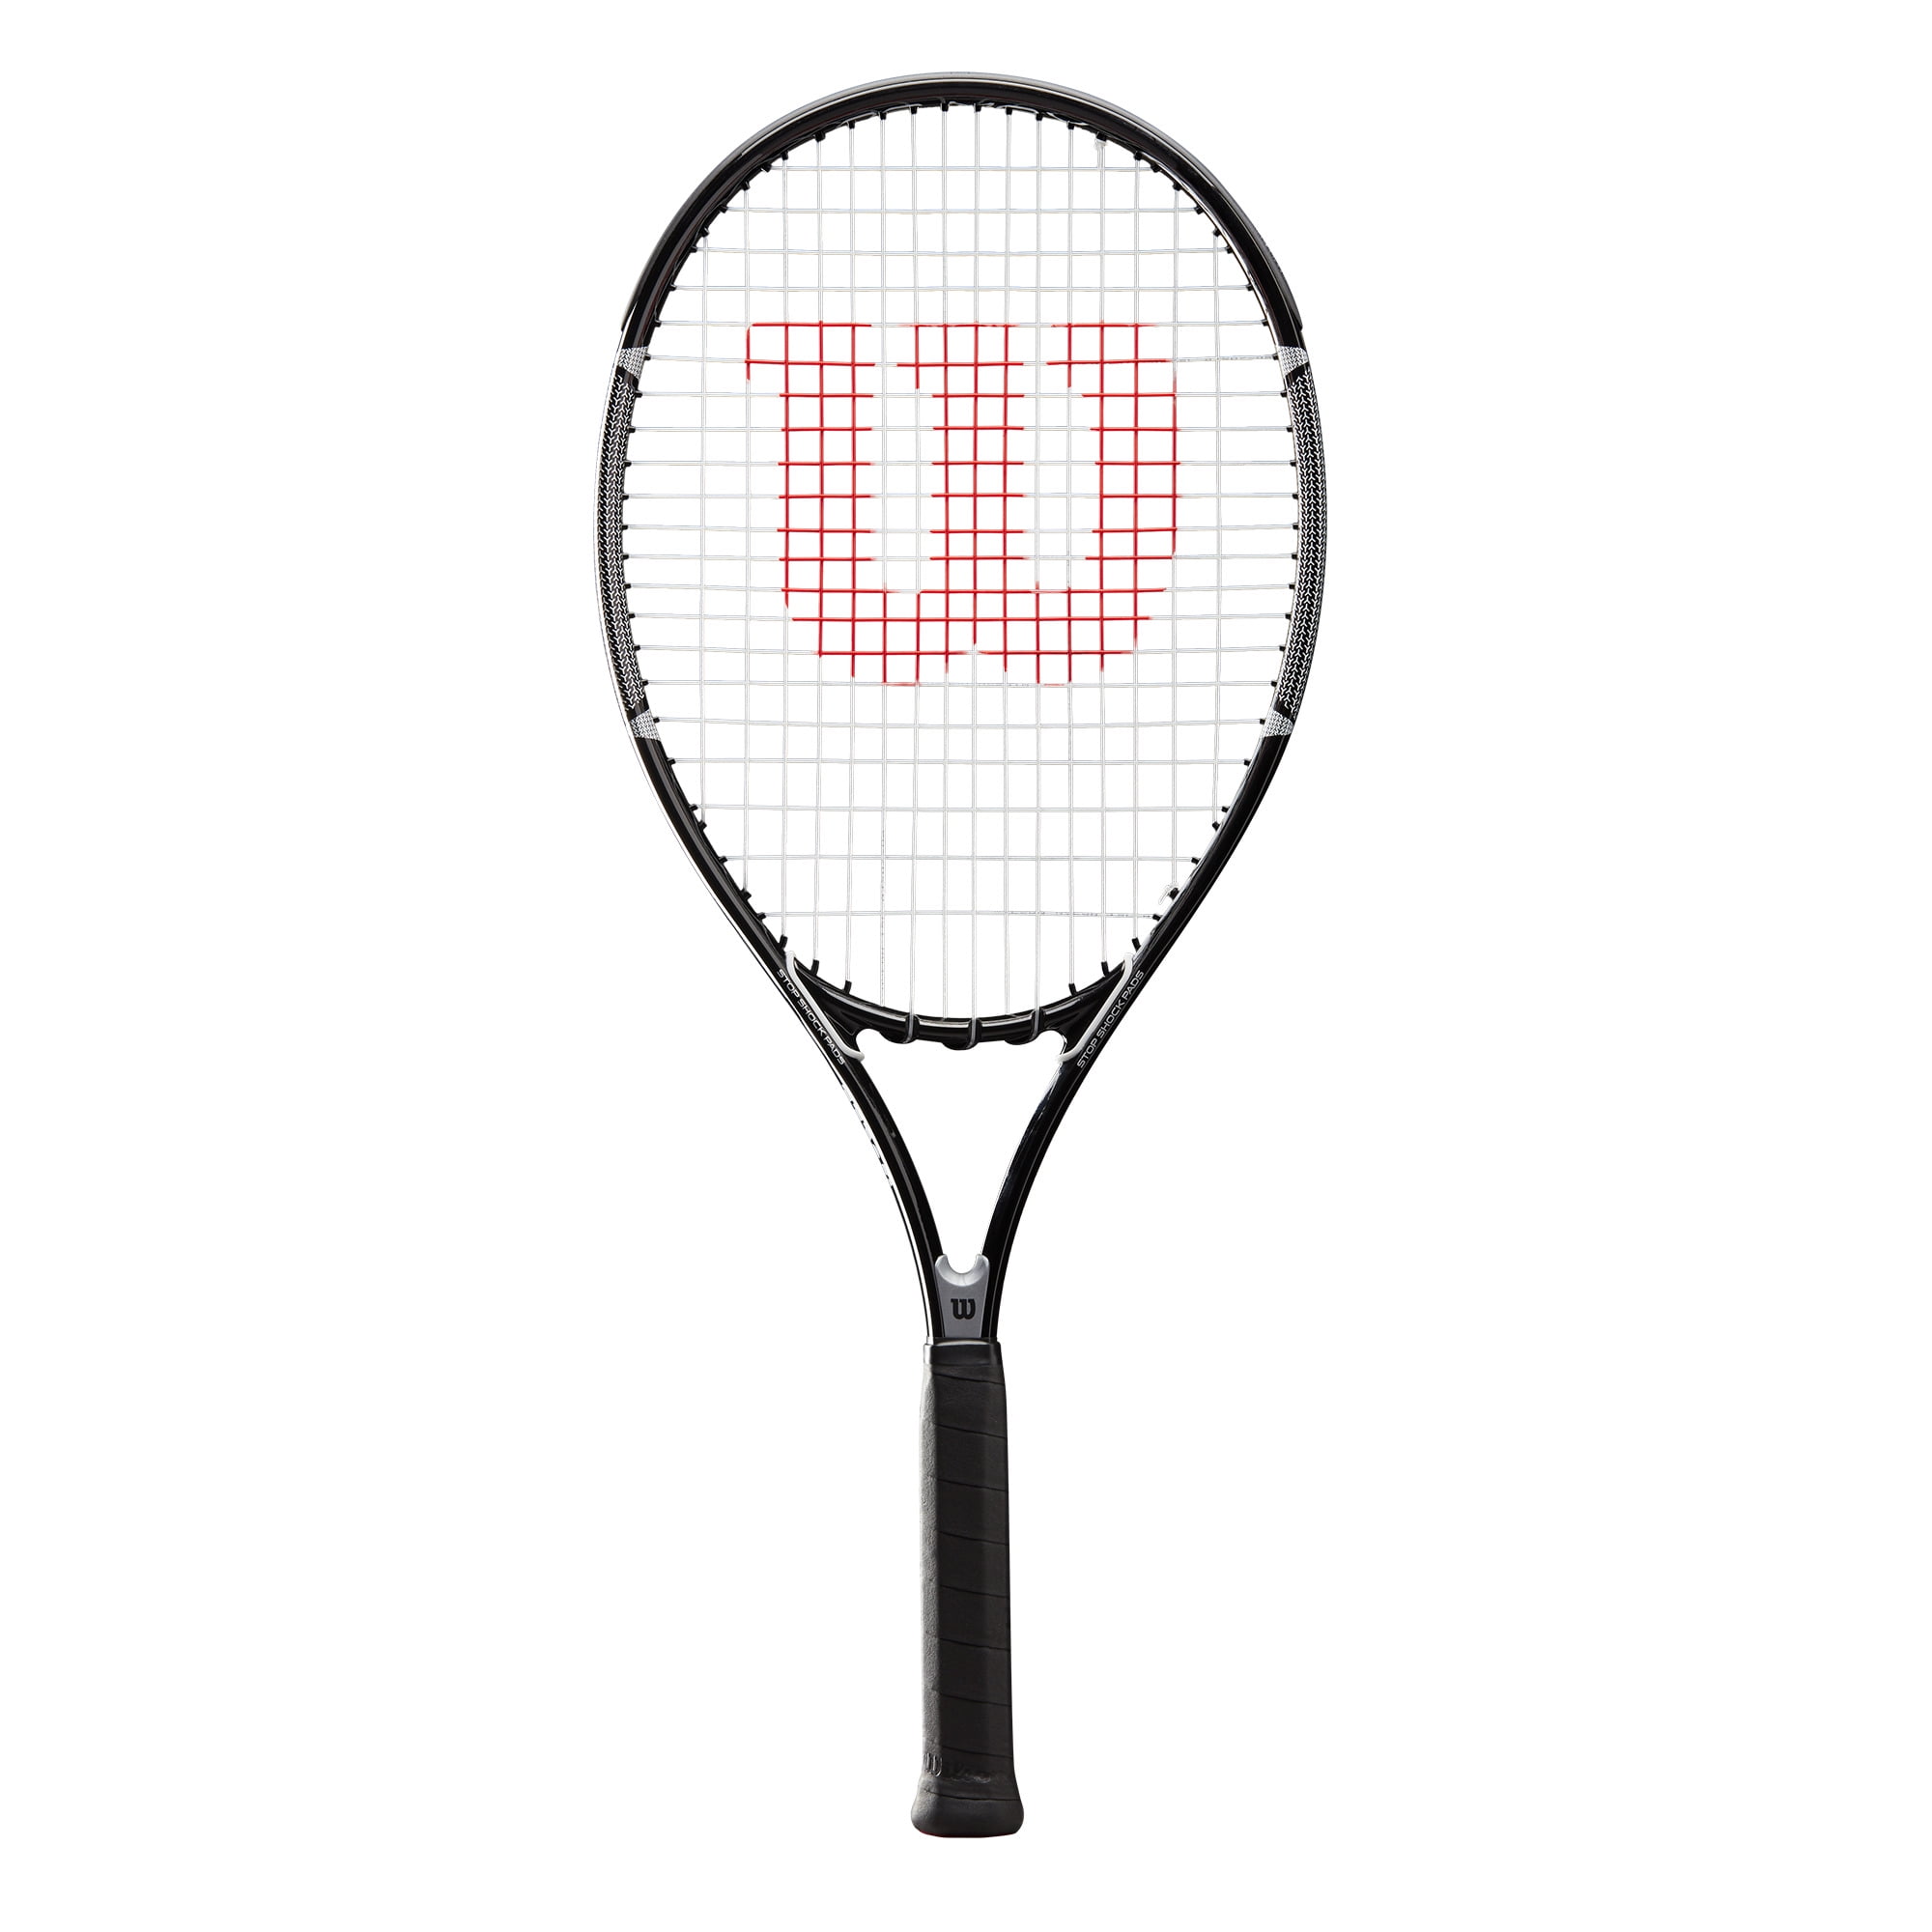 STRUNG with COVER Tennis Racquet New Head Ti.S6 4-1/4 Grip 